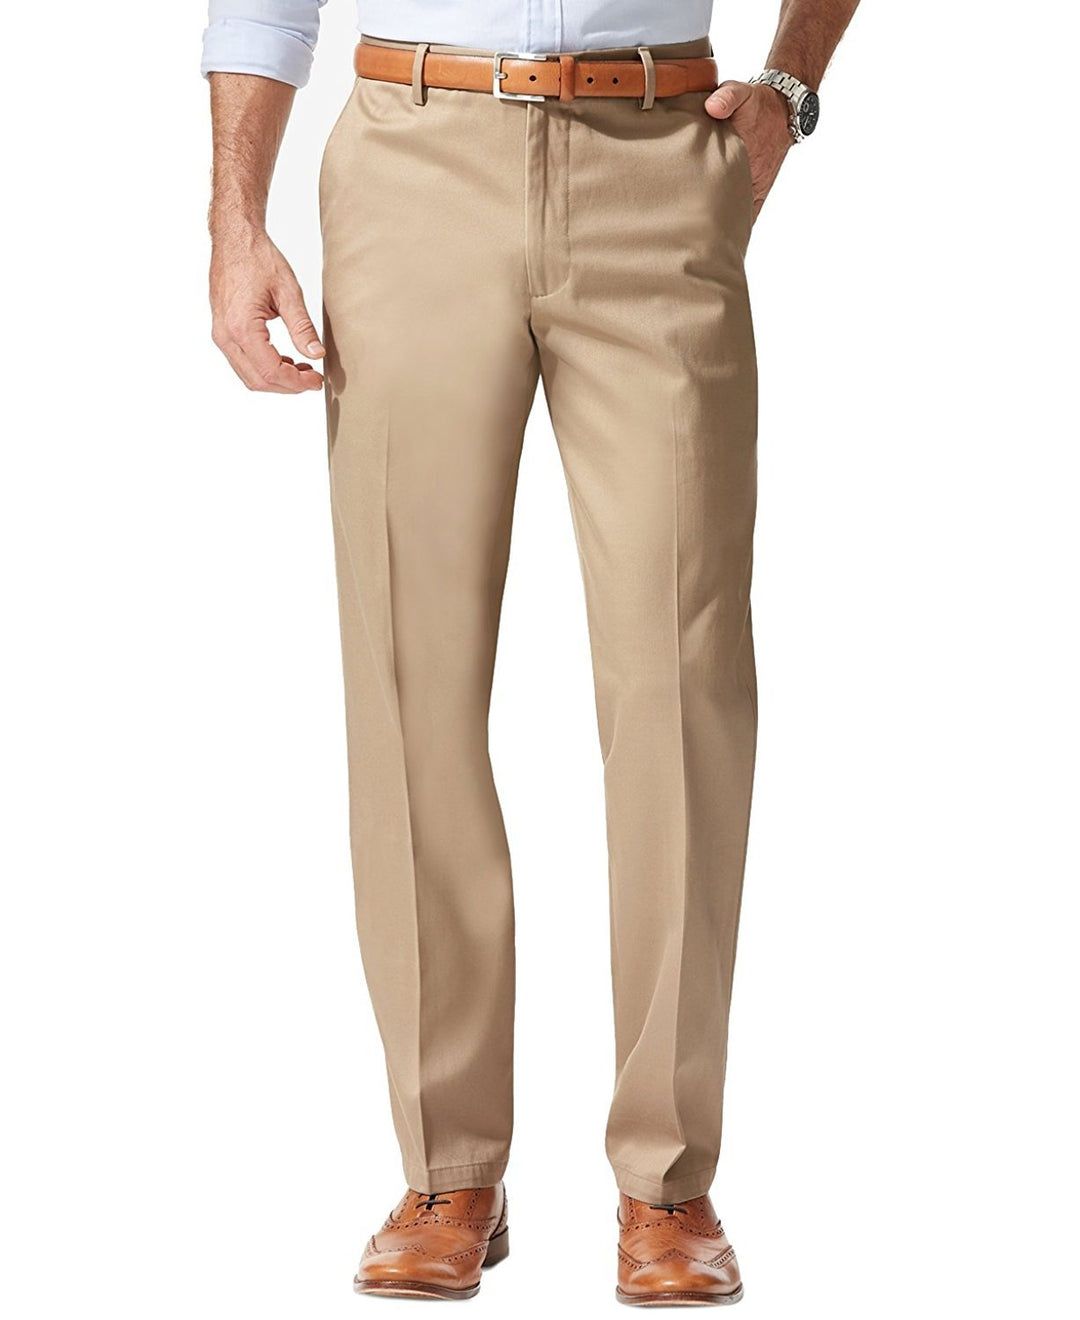 Giorgio Fiorelli Men's Modern Fit Flat Front Solid Dress Pants